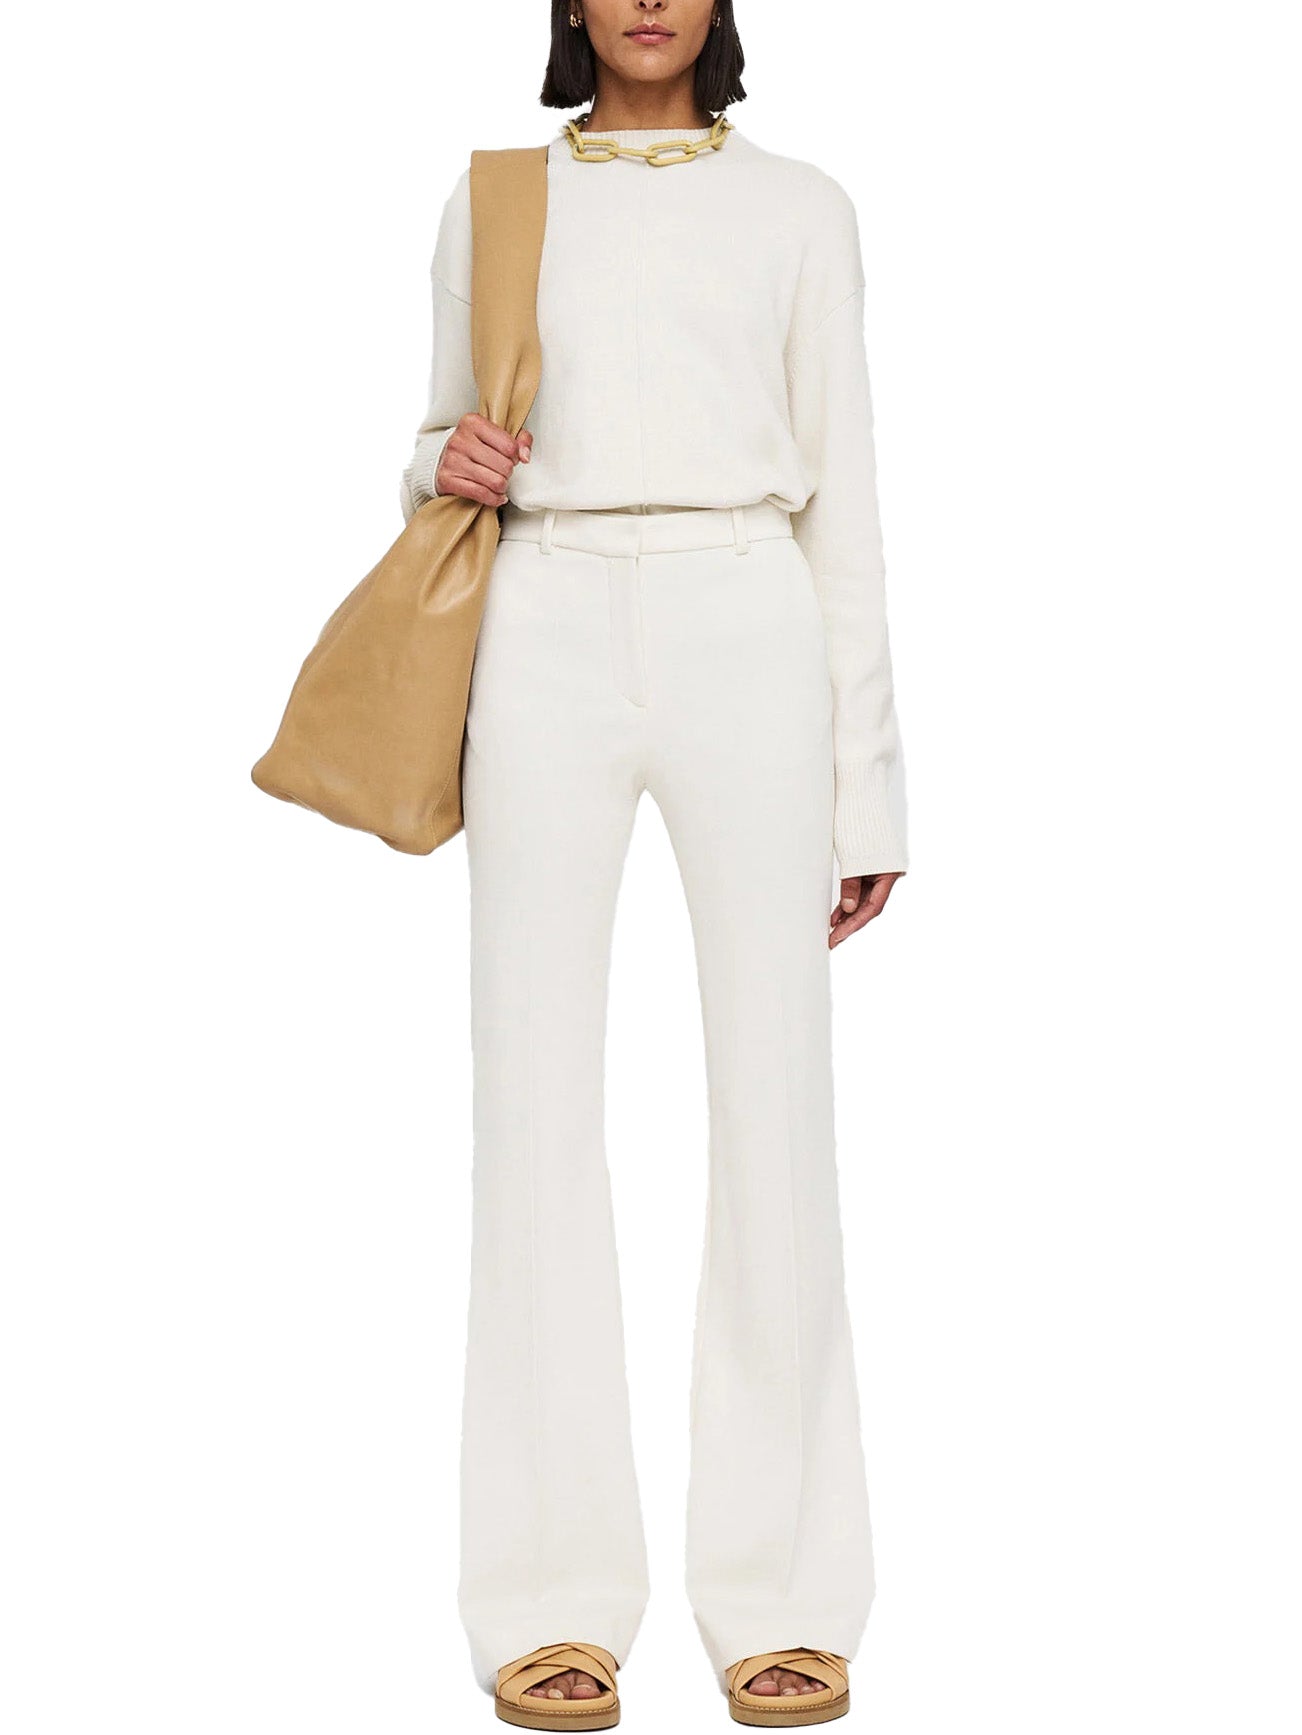 Ottoman Jersey Tafira Trousers in Oyster White